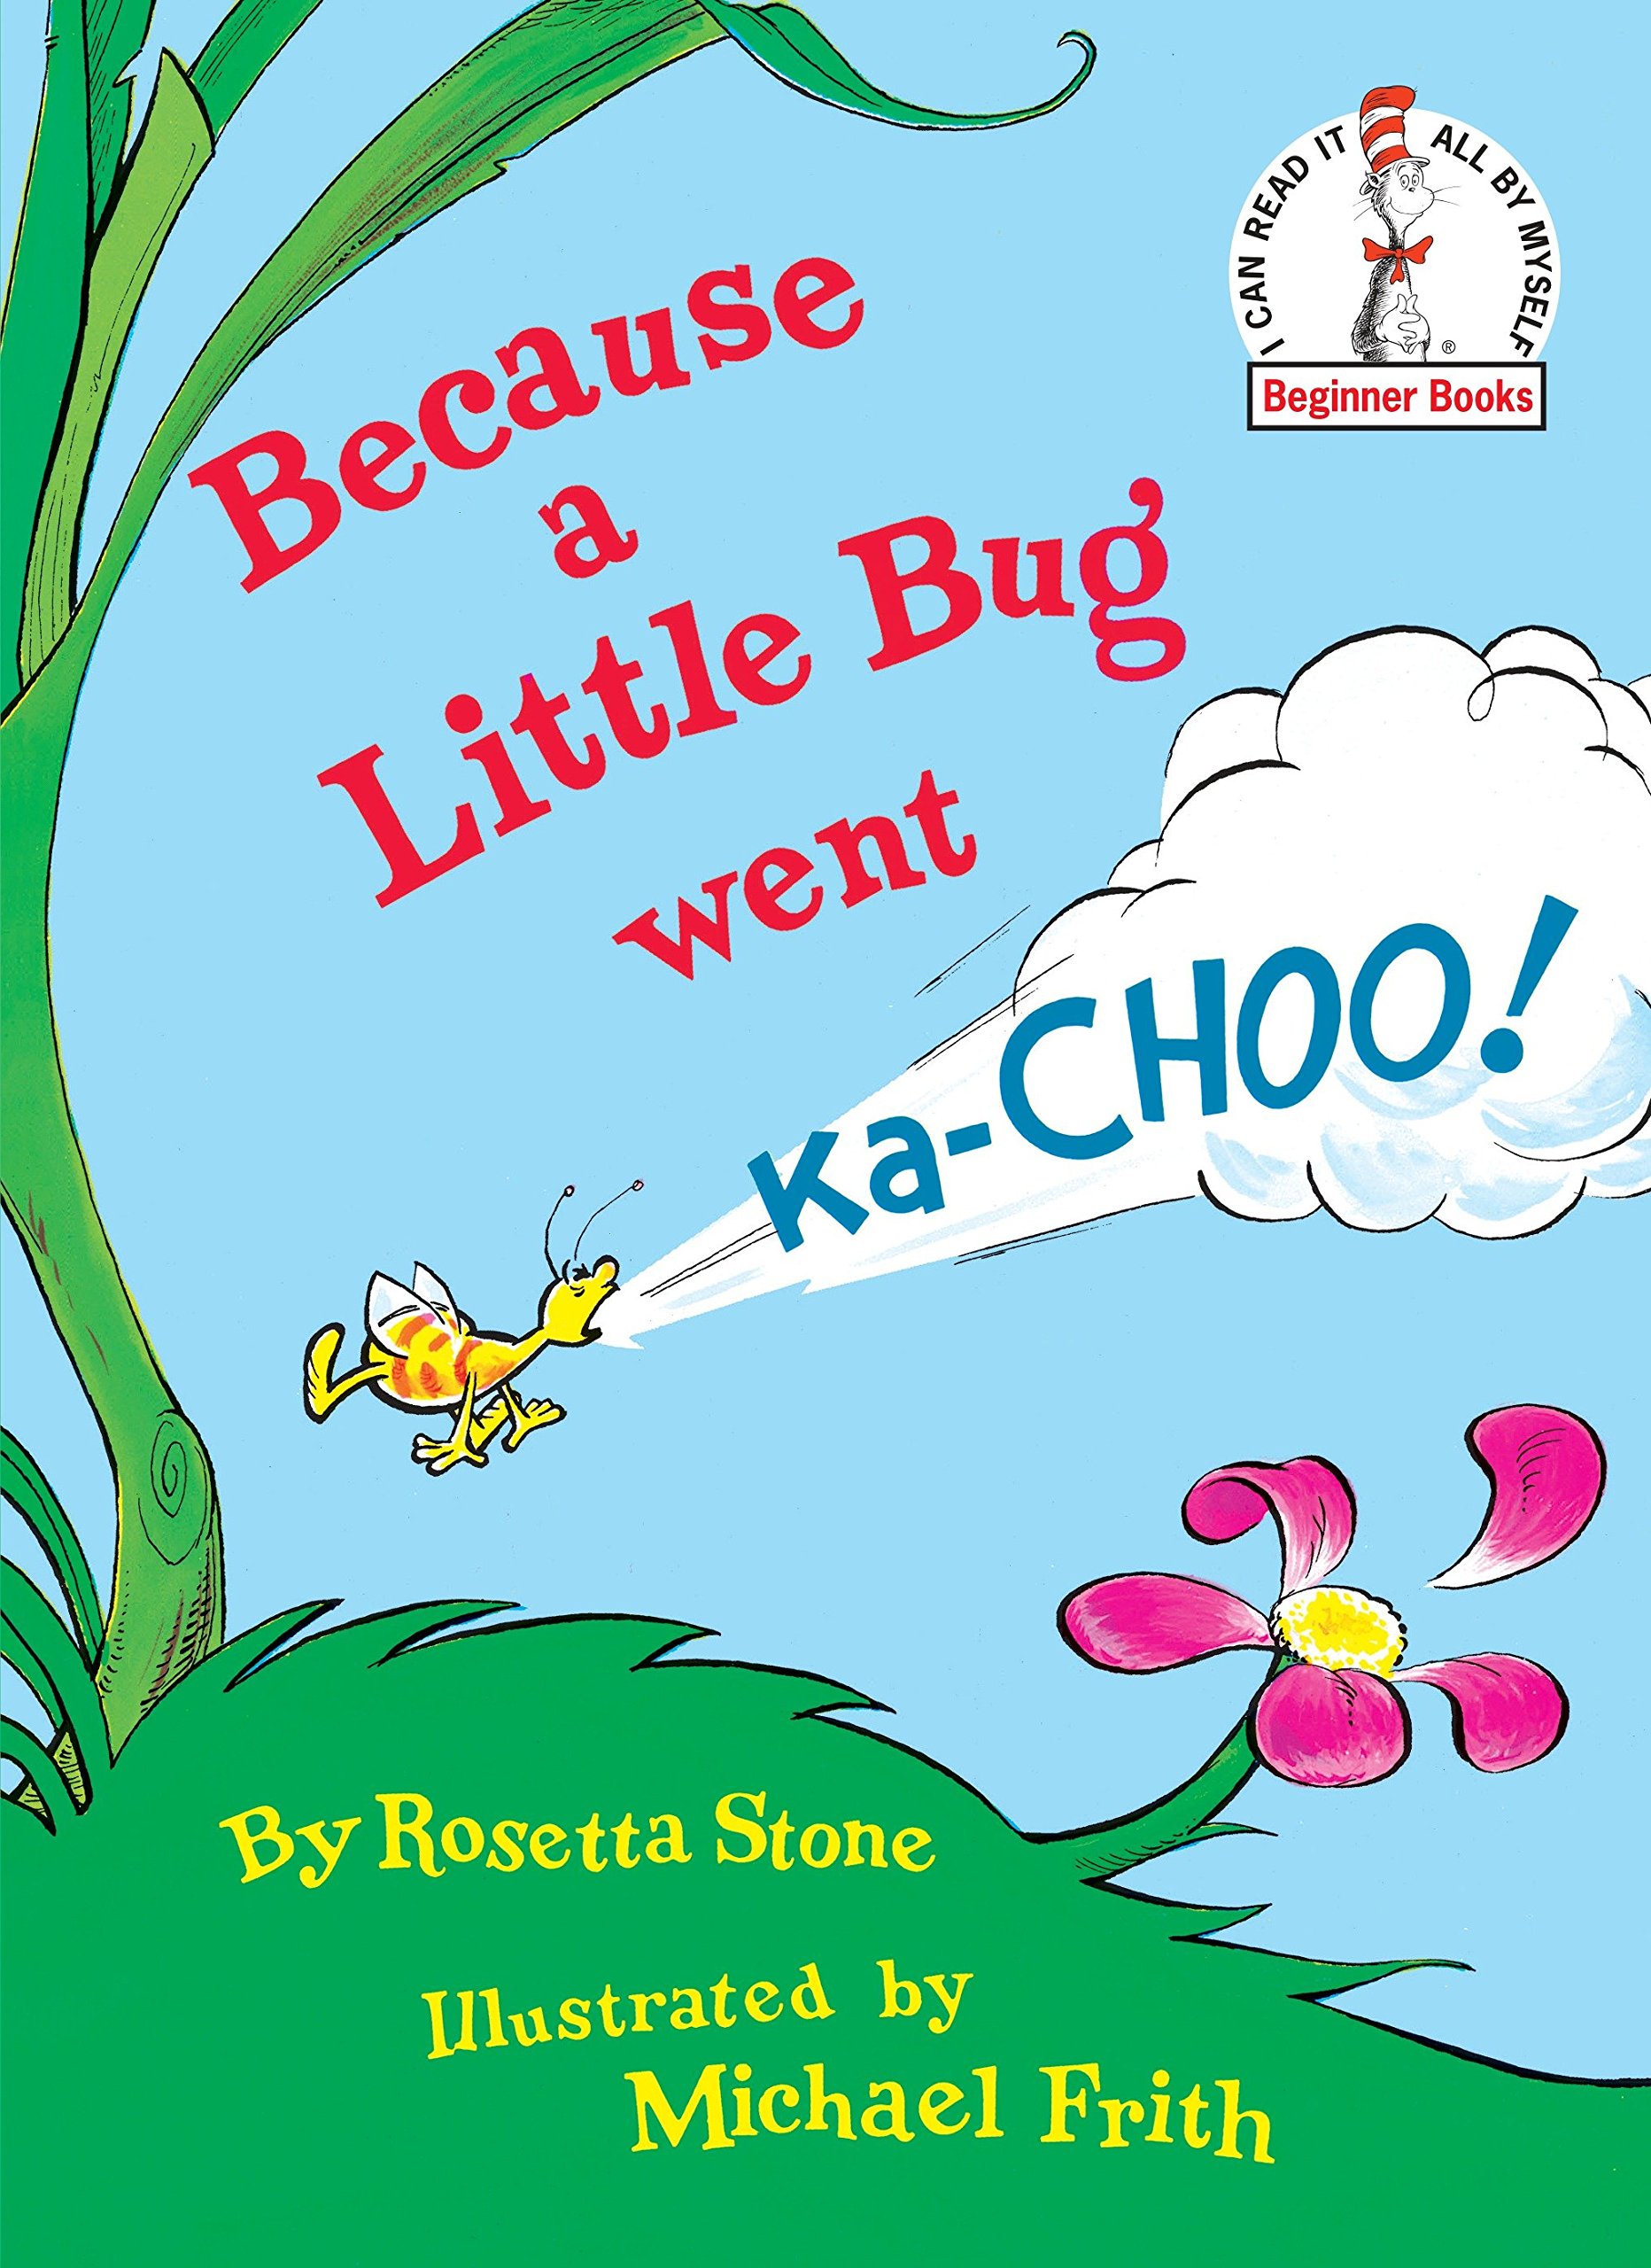 Cover of the book Because a Little Bug Wnet KA-Choo shows a small bug sneezing by a tuft of grass and a pink flower